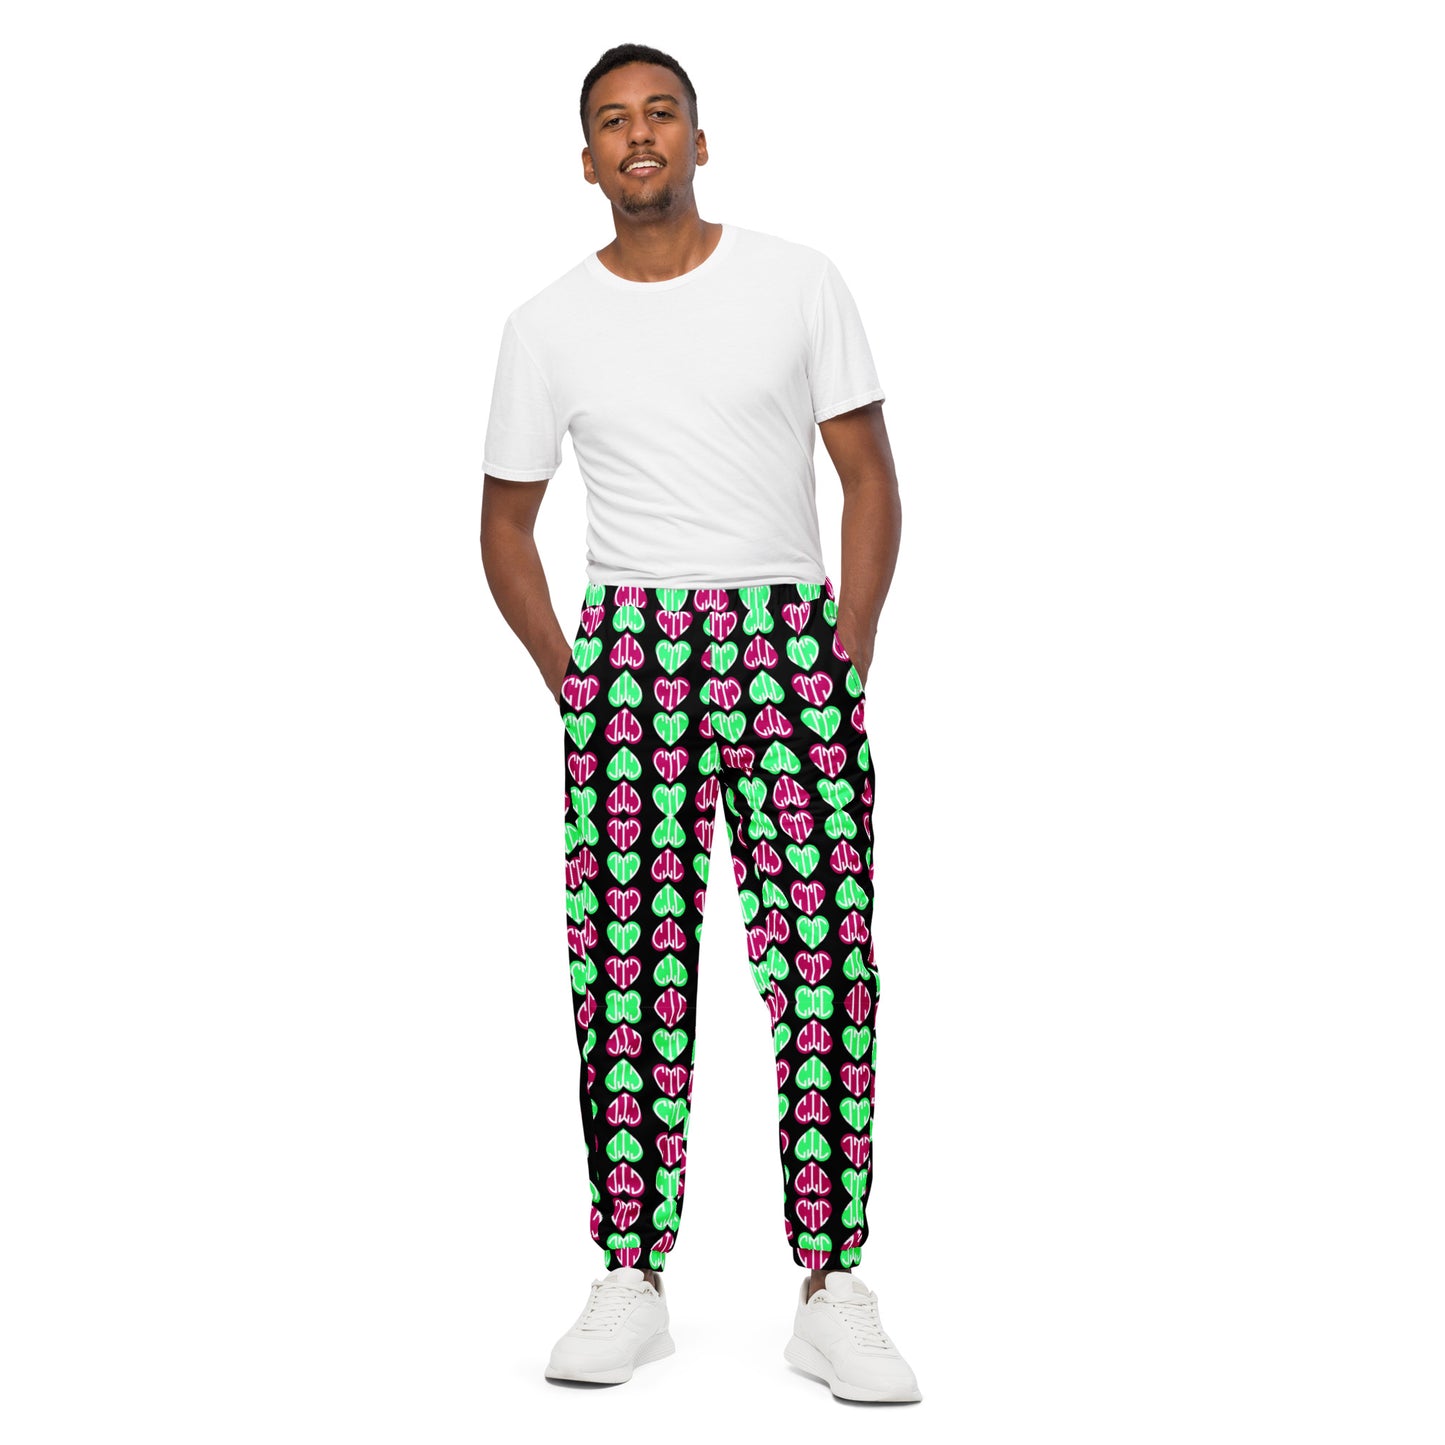 CtC Hearts All-Over track pants